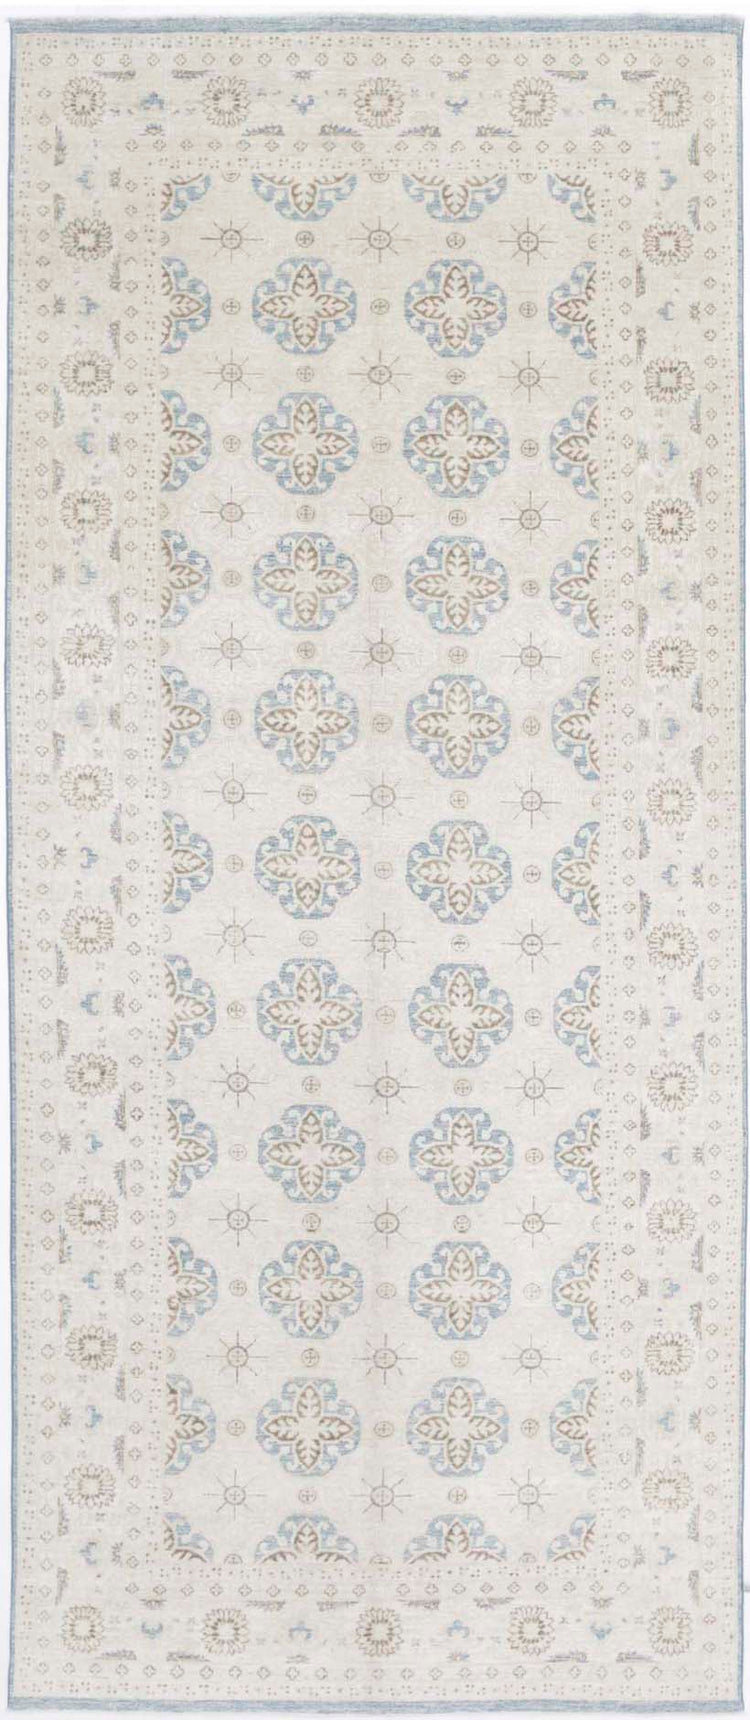 Hand Knotted Serenity Wool Rug - 5'1'' x 12'8''